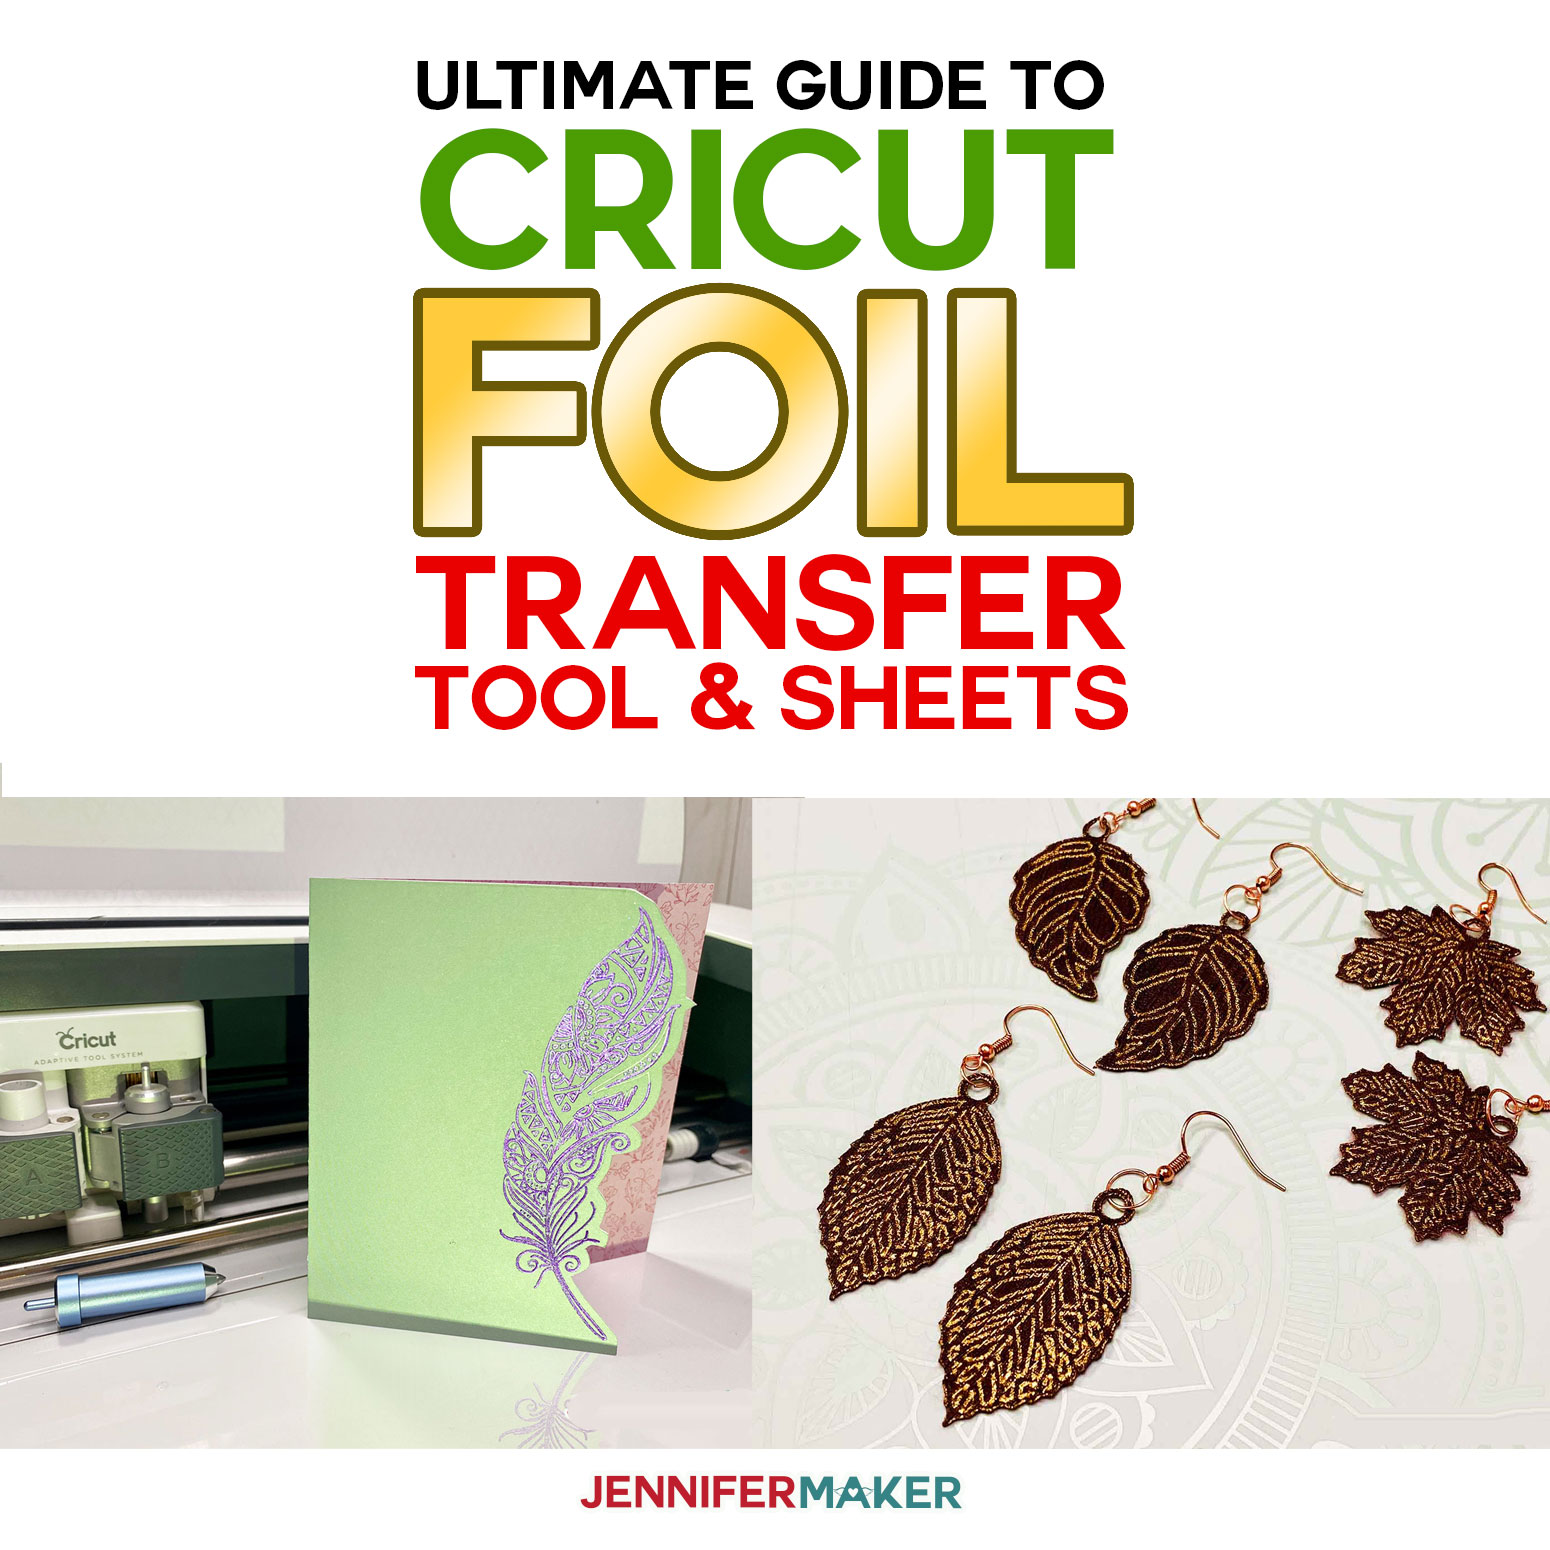 Cricut Foil Transfer: The Ultimate Guide to Foiling